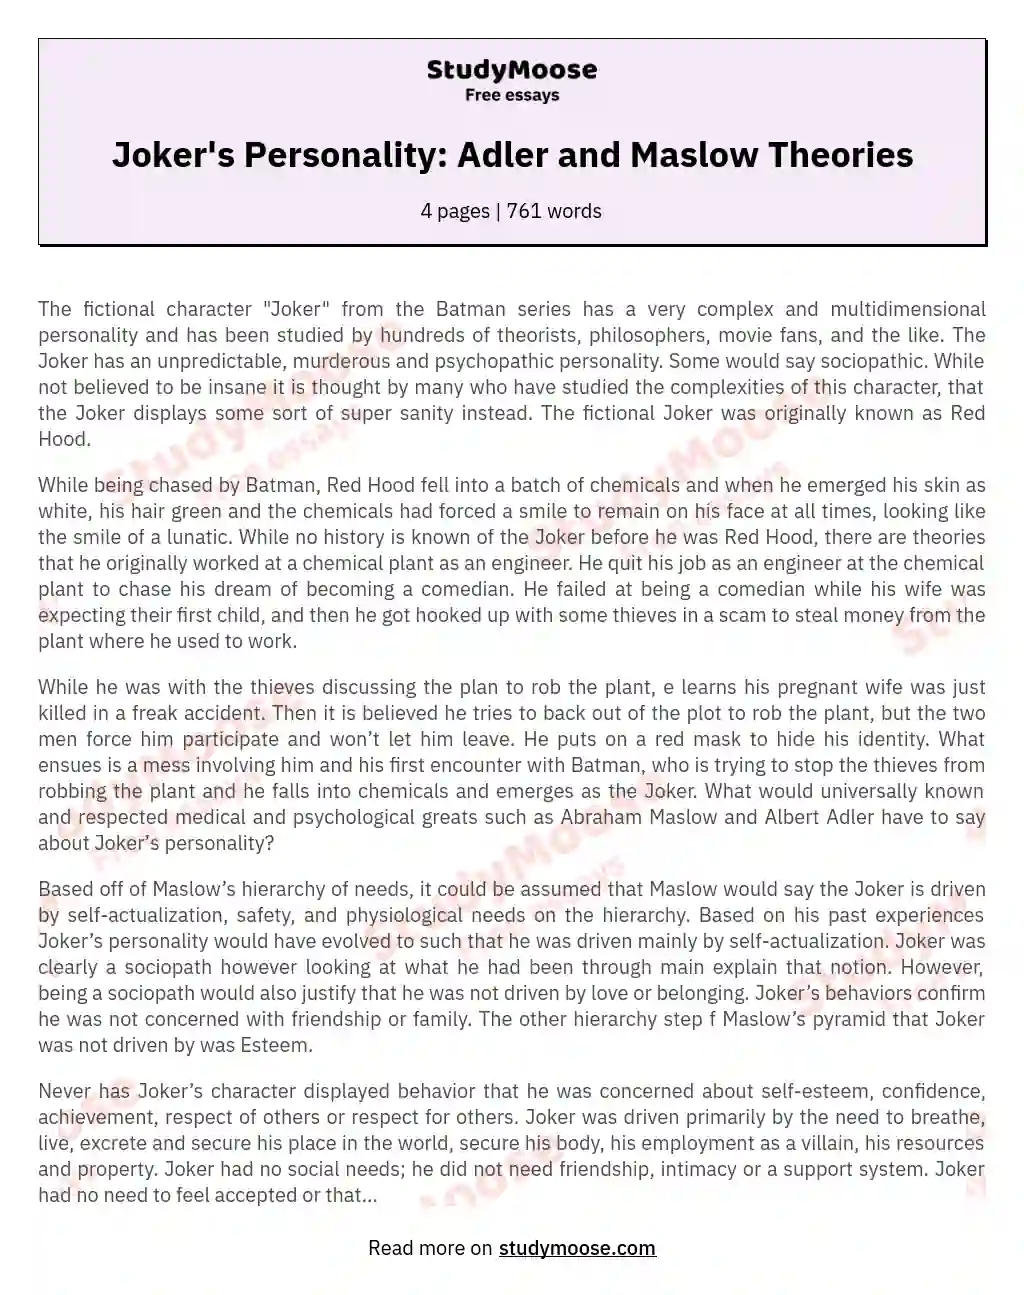 Joker's Personality: Adler and Maslow Theories essay